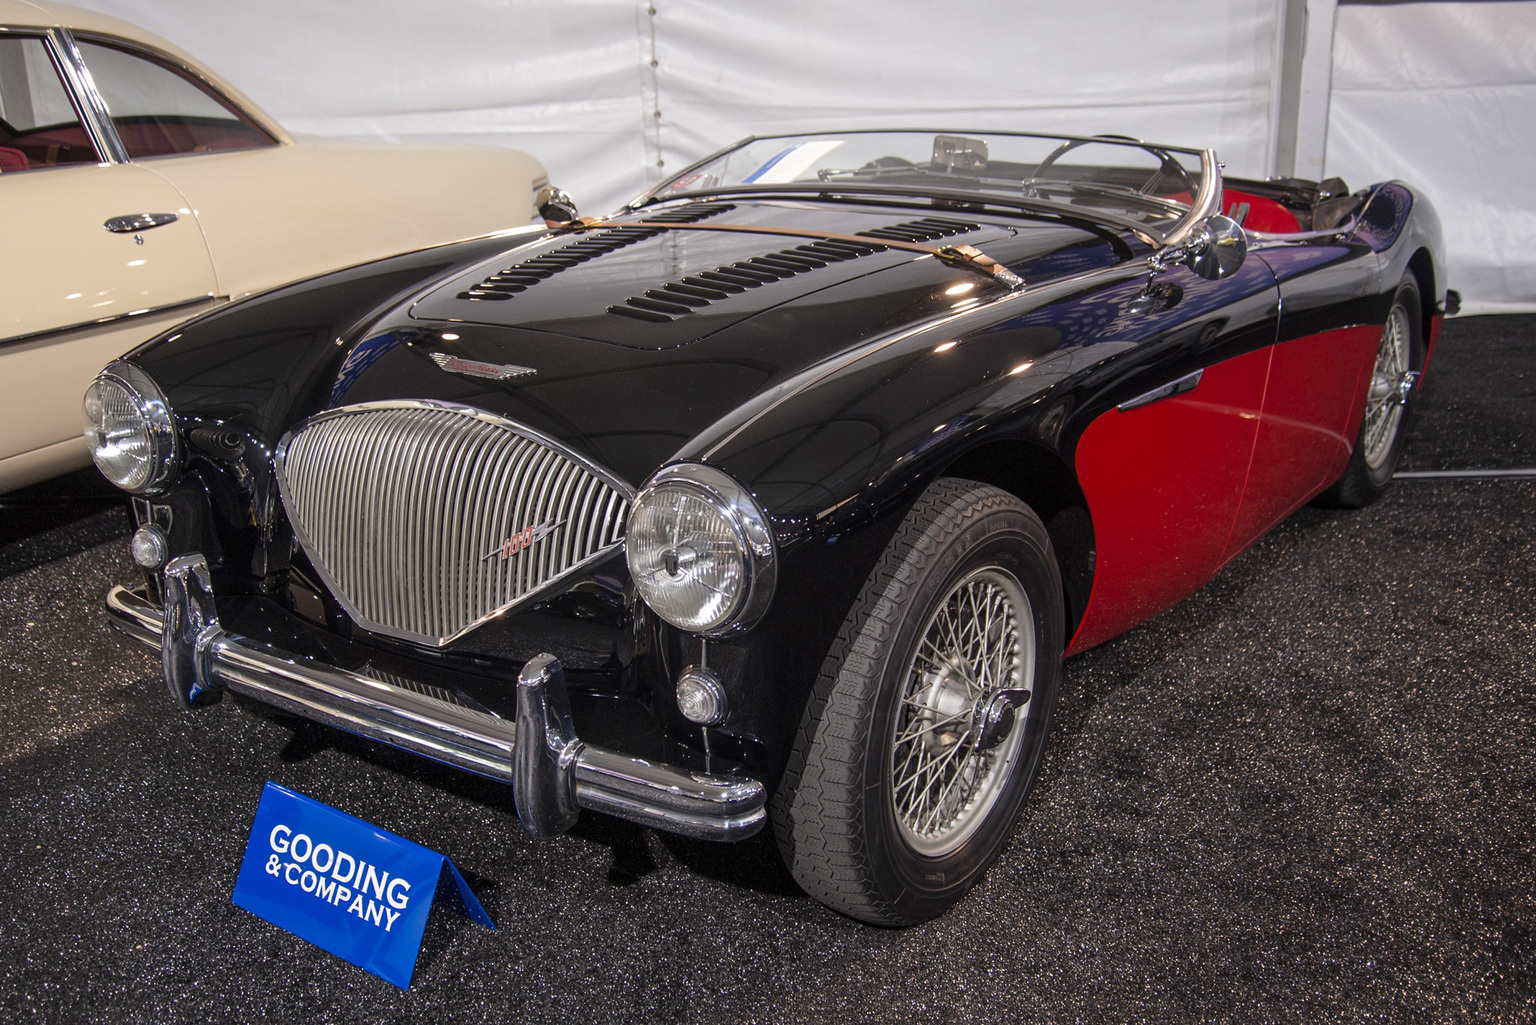 The Scottsdale Auctions by Gooding &Company